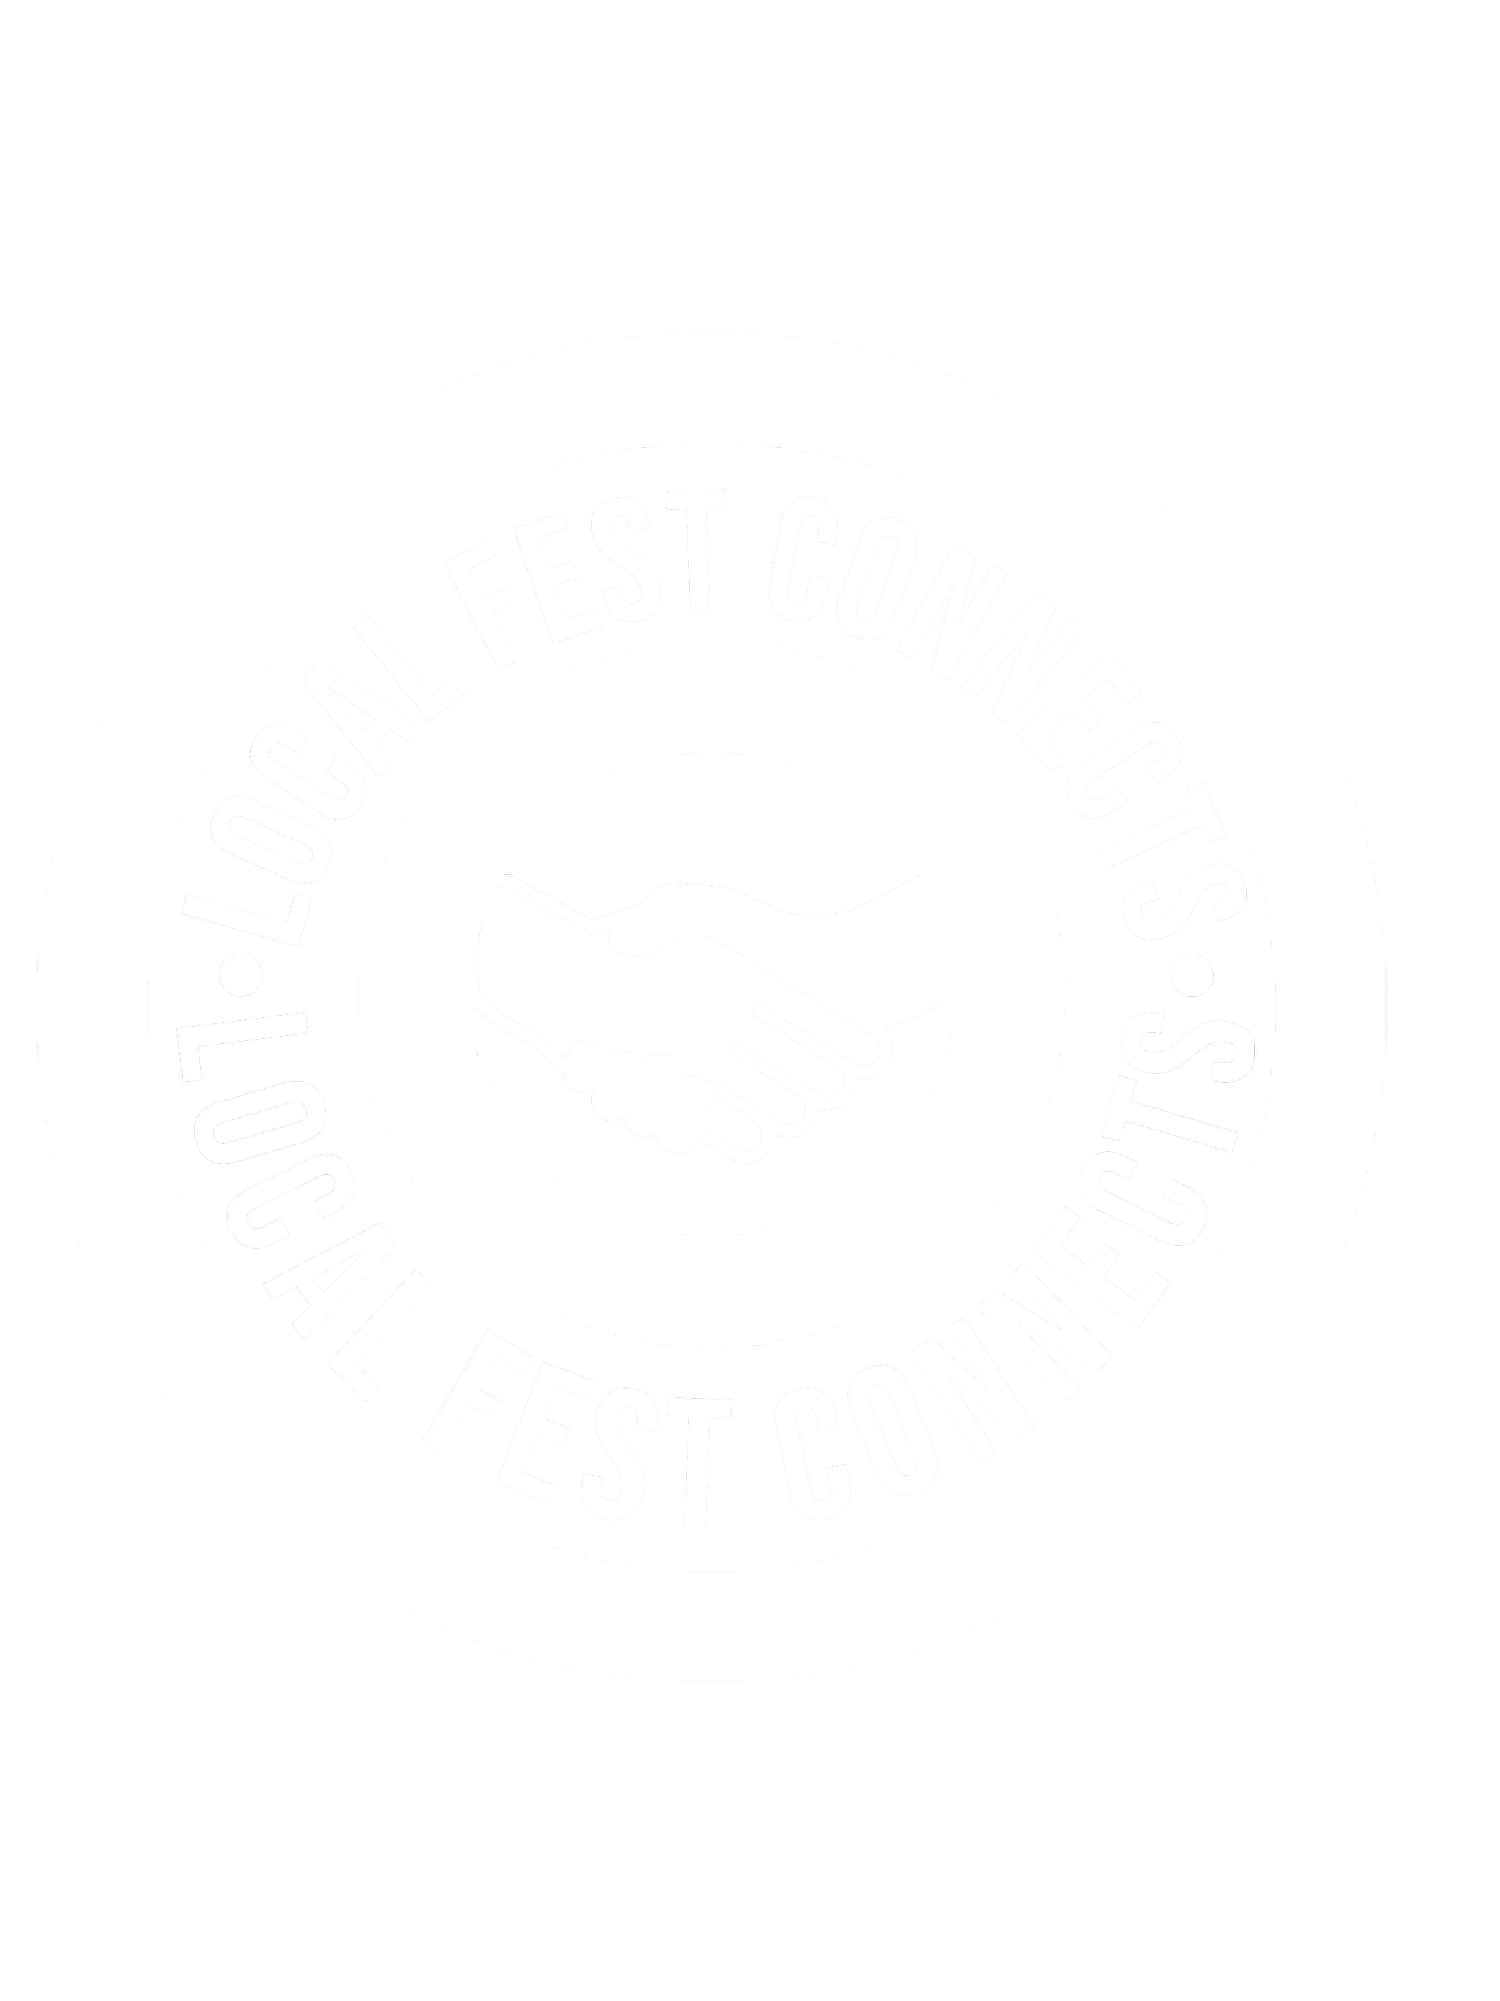 Local Fest Connects localfestconnects